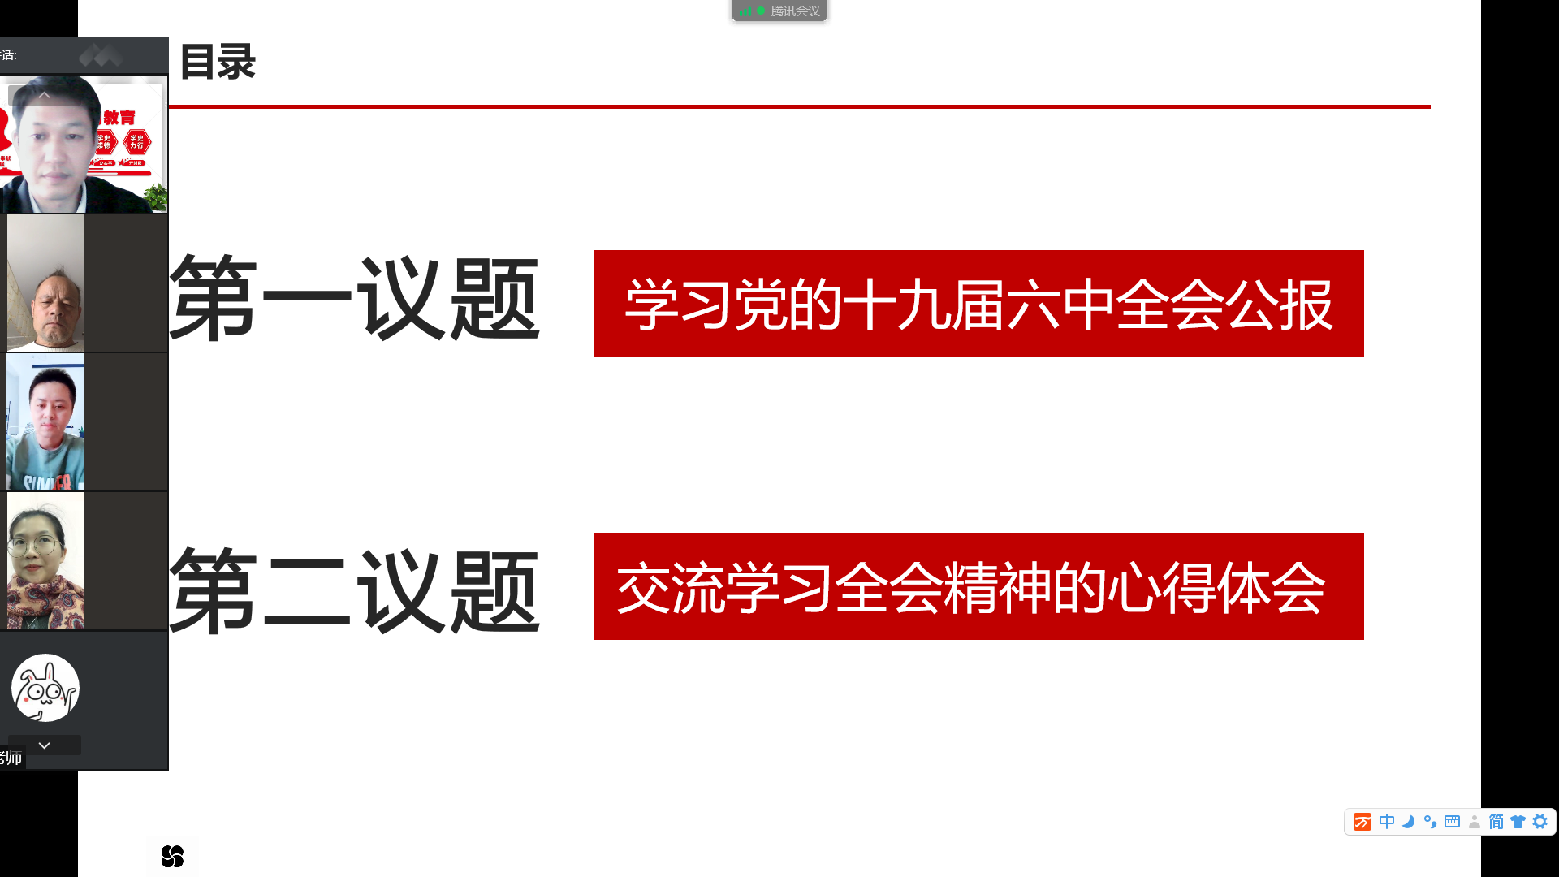 C:\Documents and Settings\Administrator\桌面\图片2.png